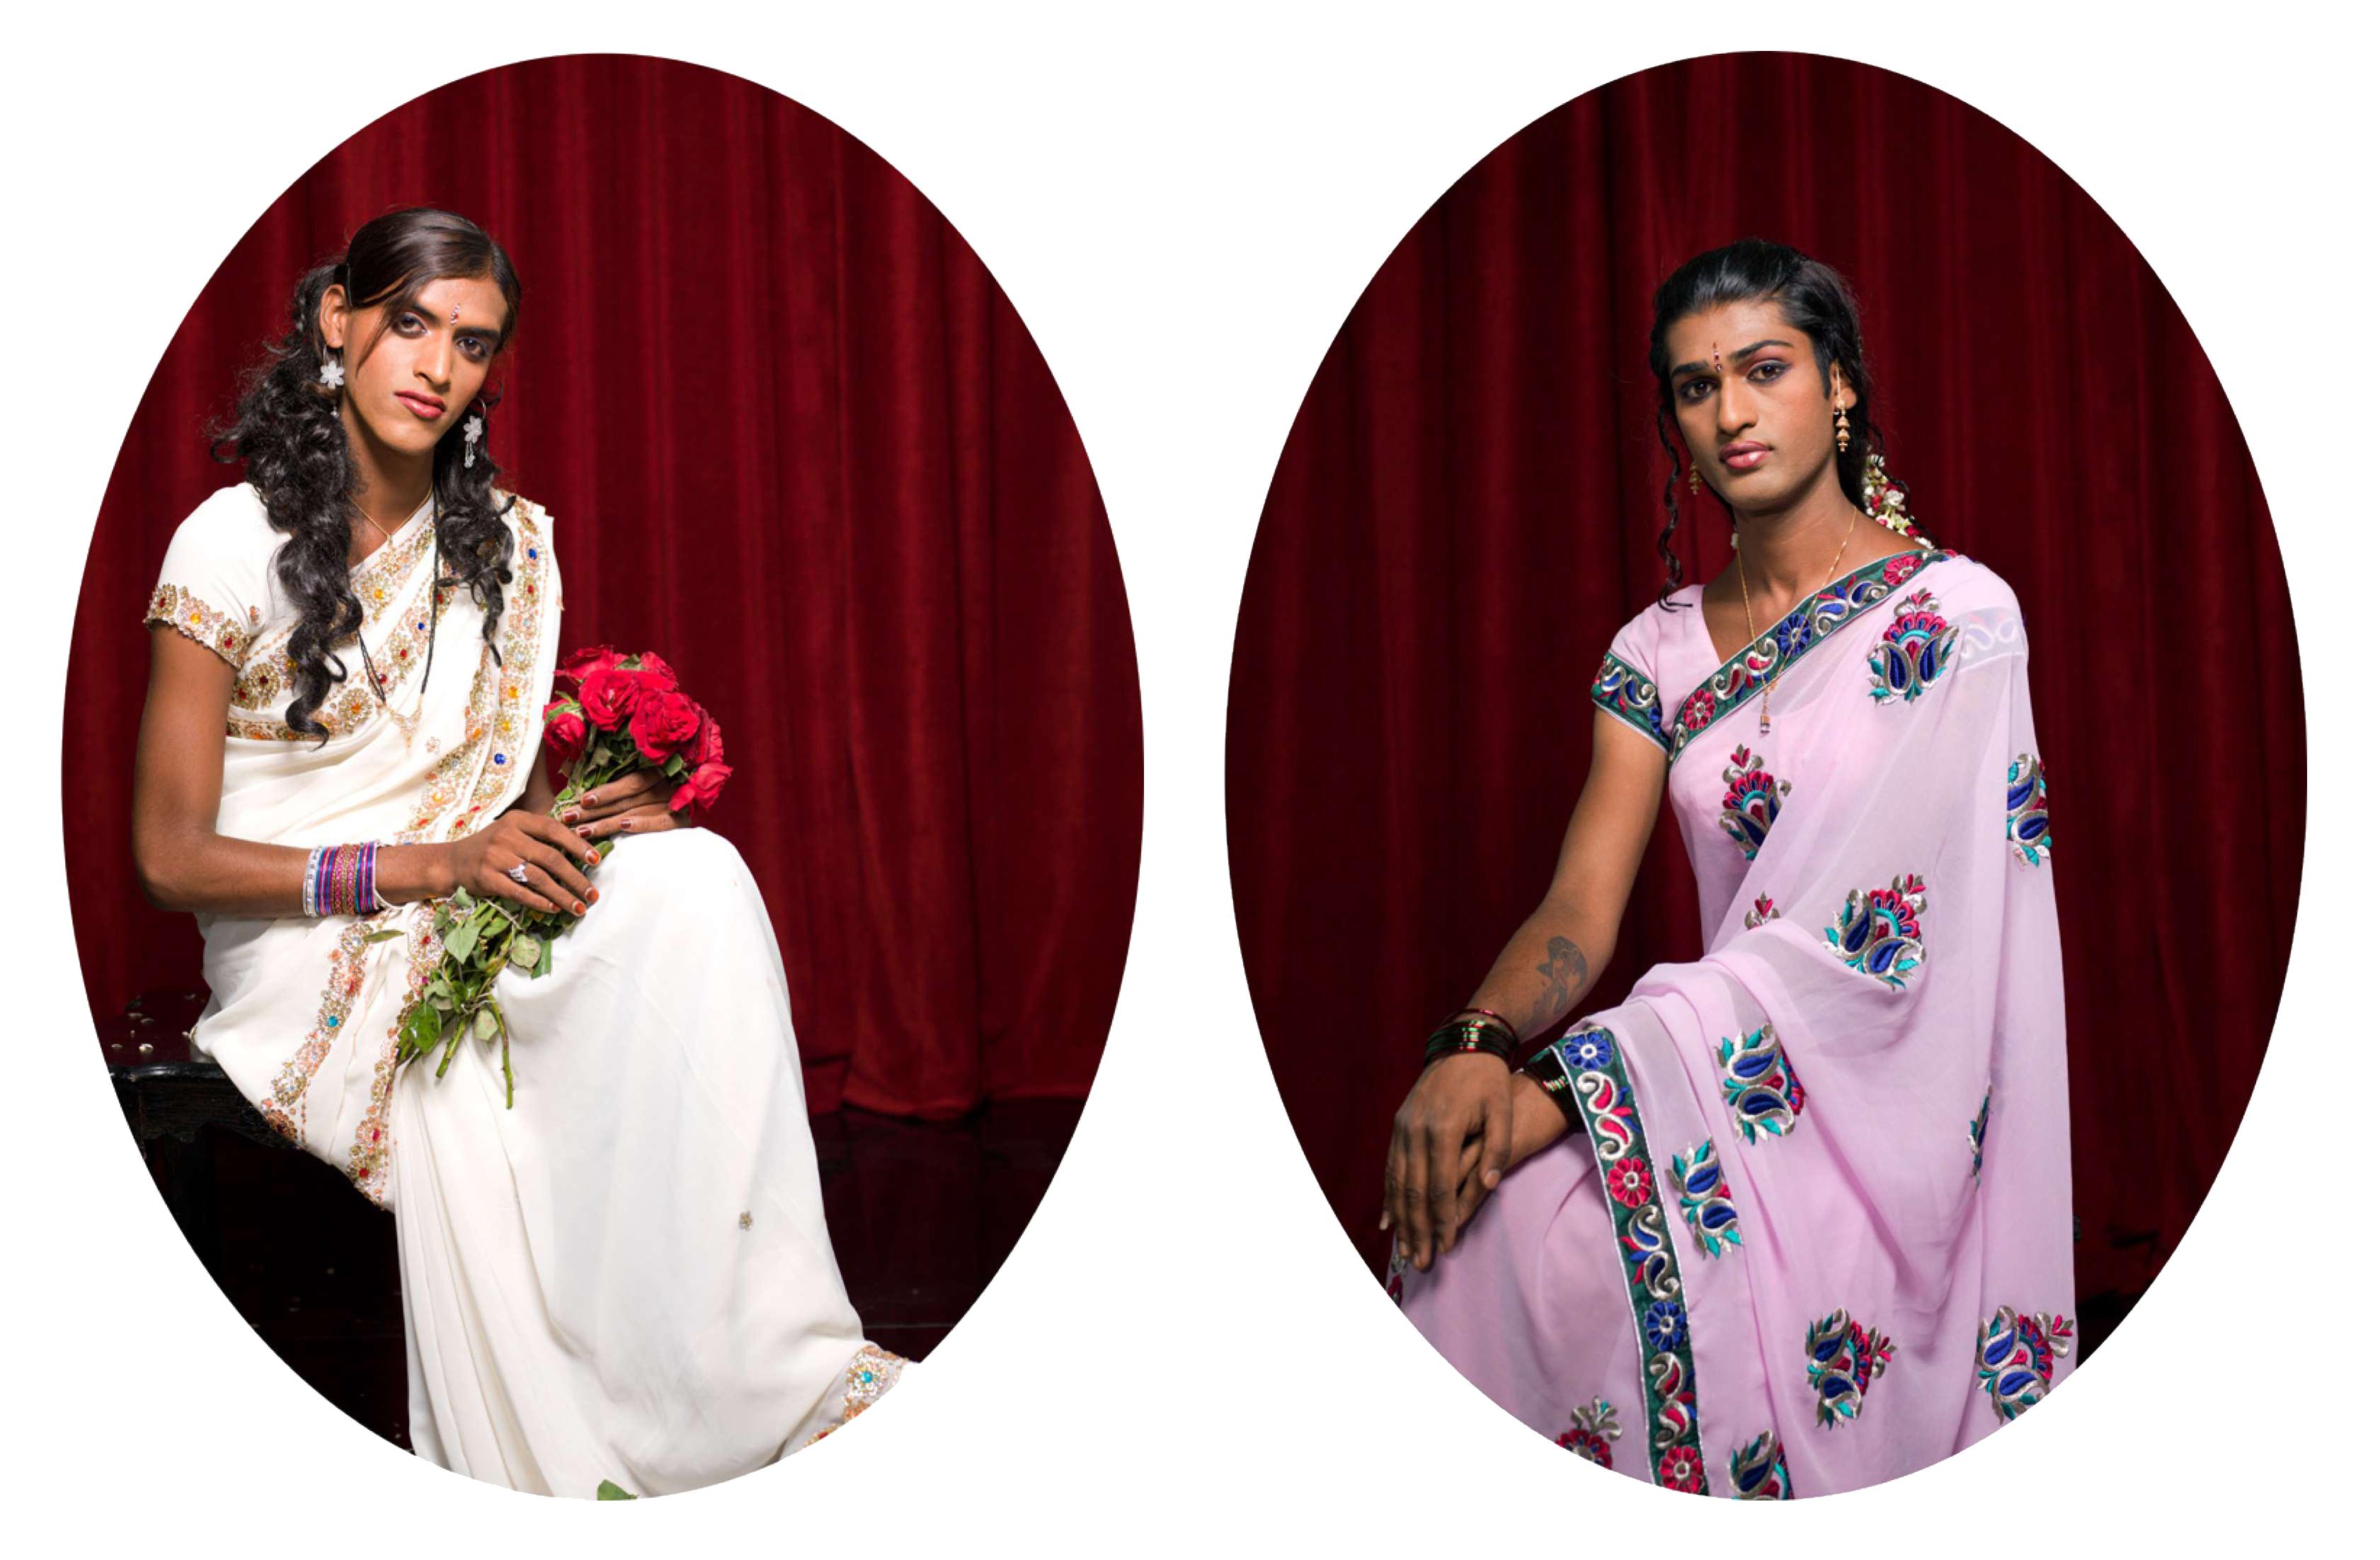 Jill Peters Portrait Photograph - Muskan and Sangita, Protraits. From The Third Gender of India Series